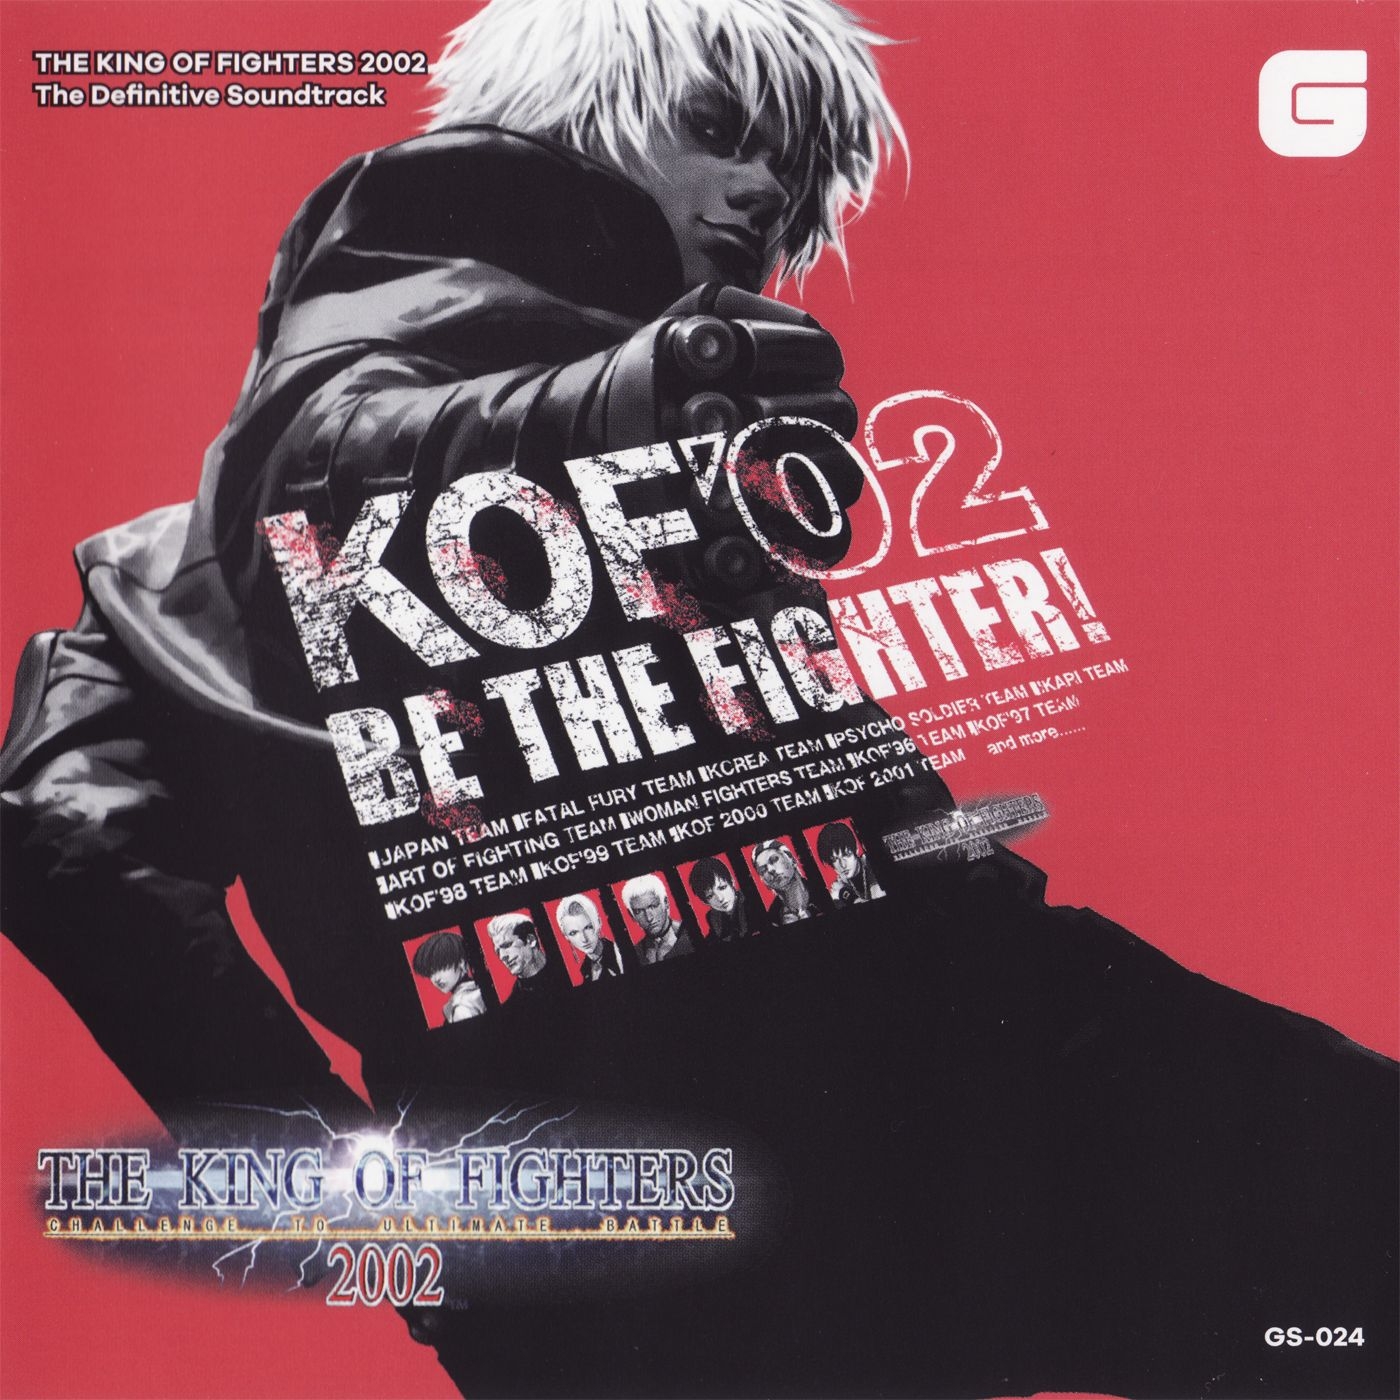 THE KING OF FIGHTERS 2002 The Definitive Soundtrack (2021) MP3 